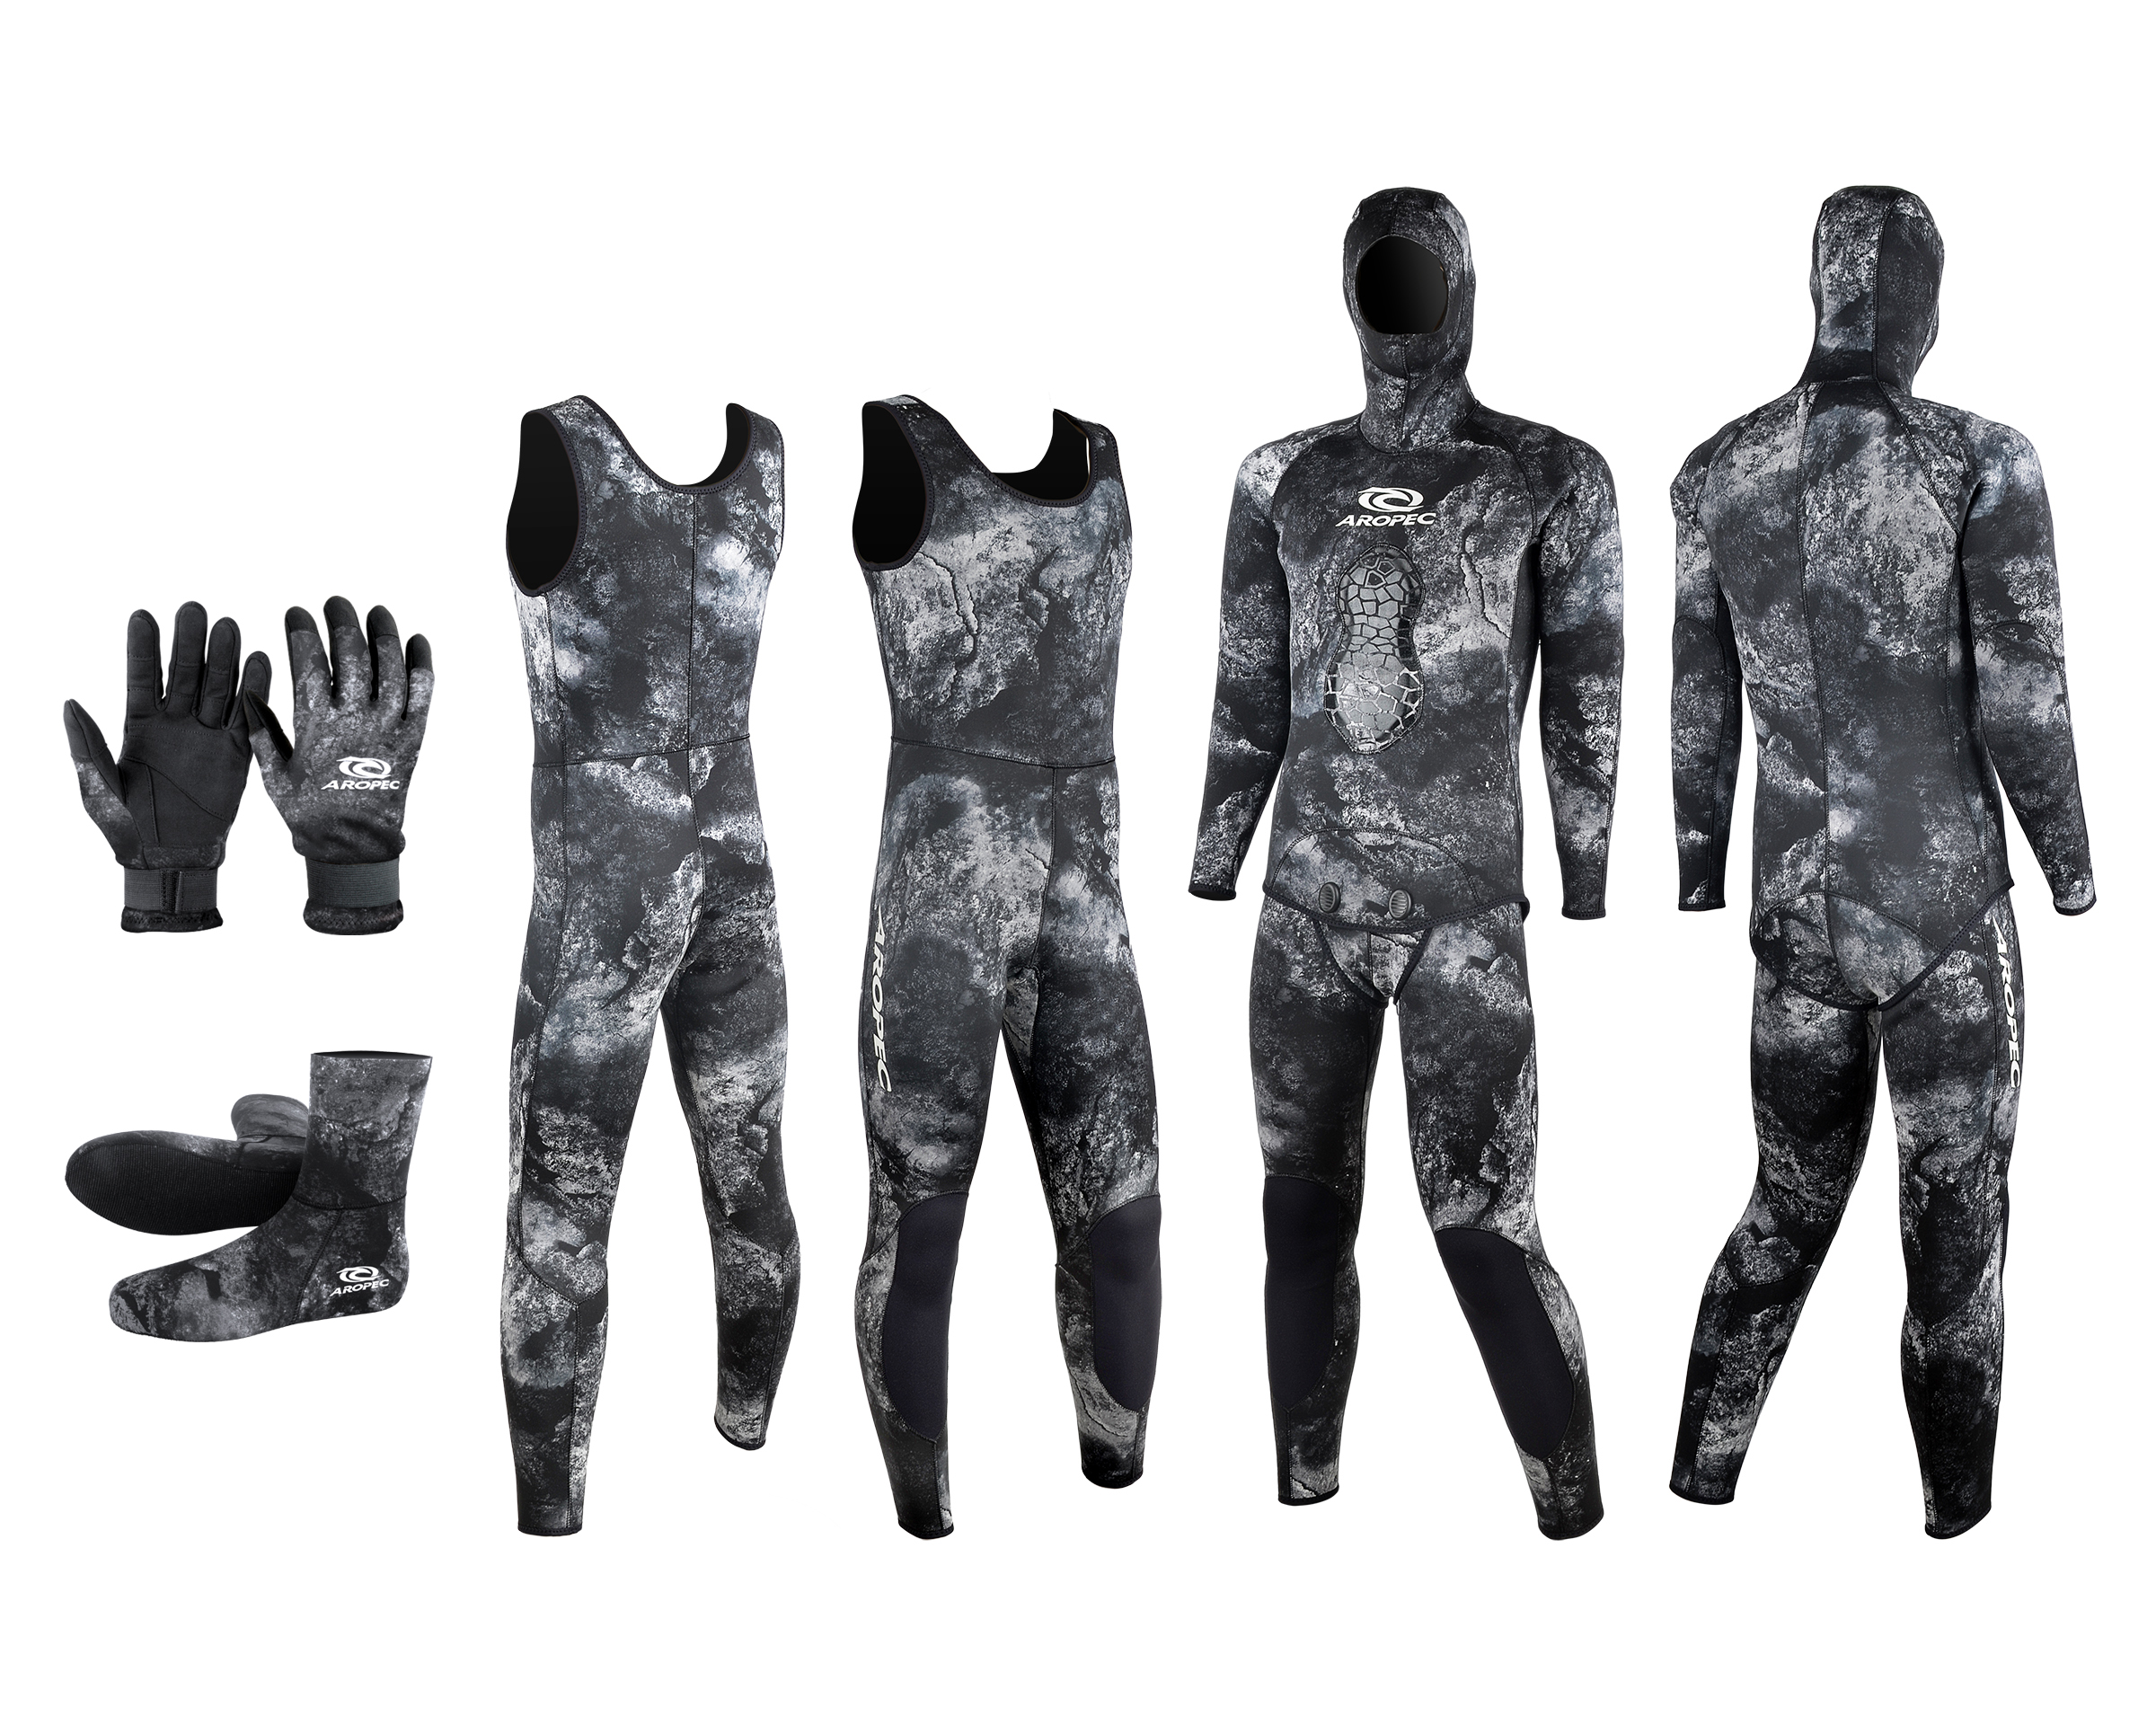 Black Camo Spearfishing wetsuit and accessories